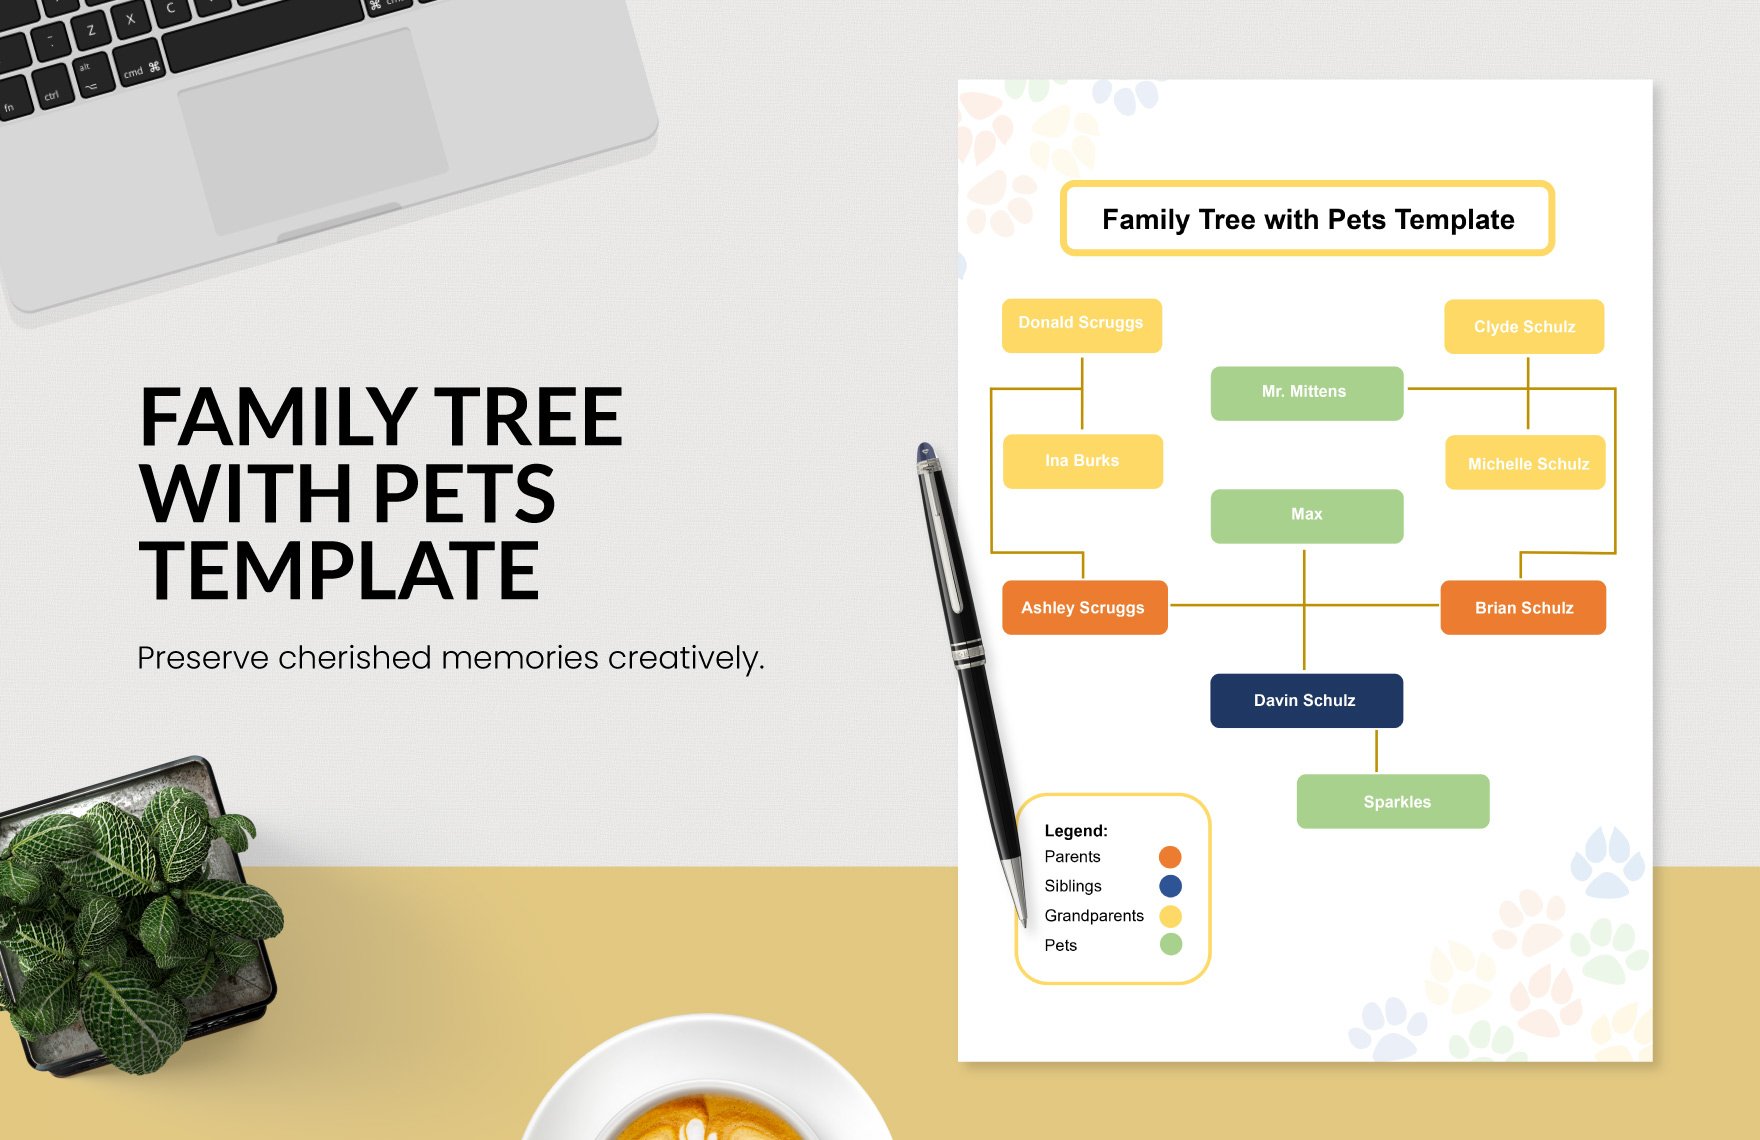 Family Tree with Pets Template